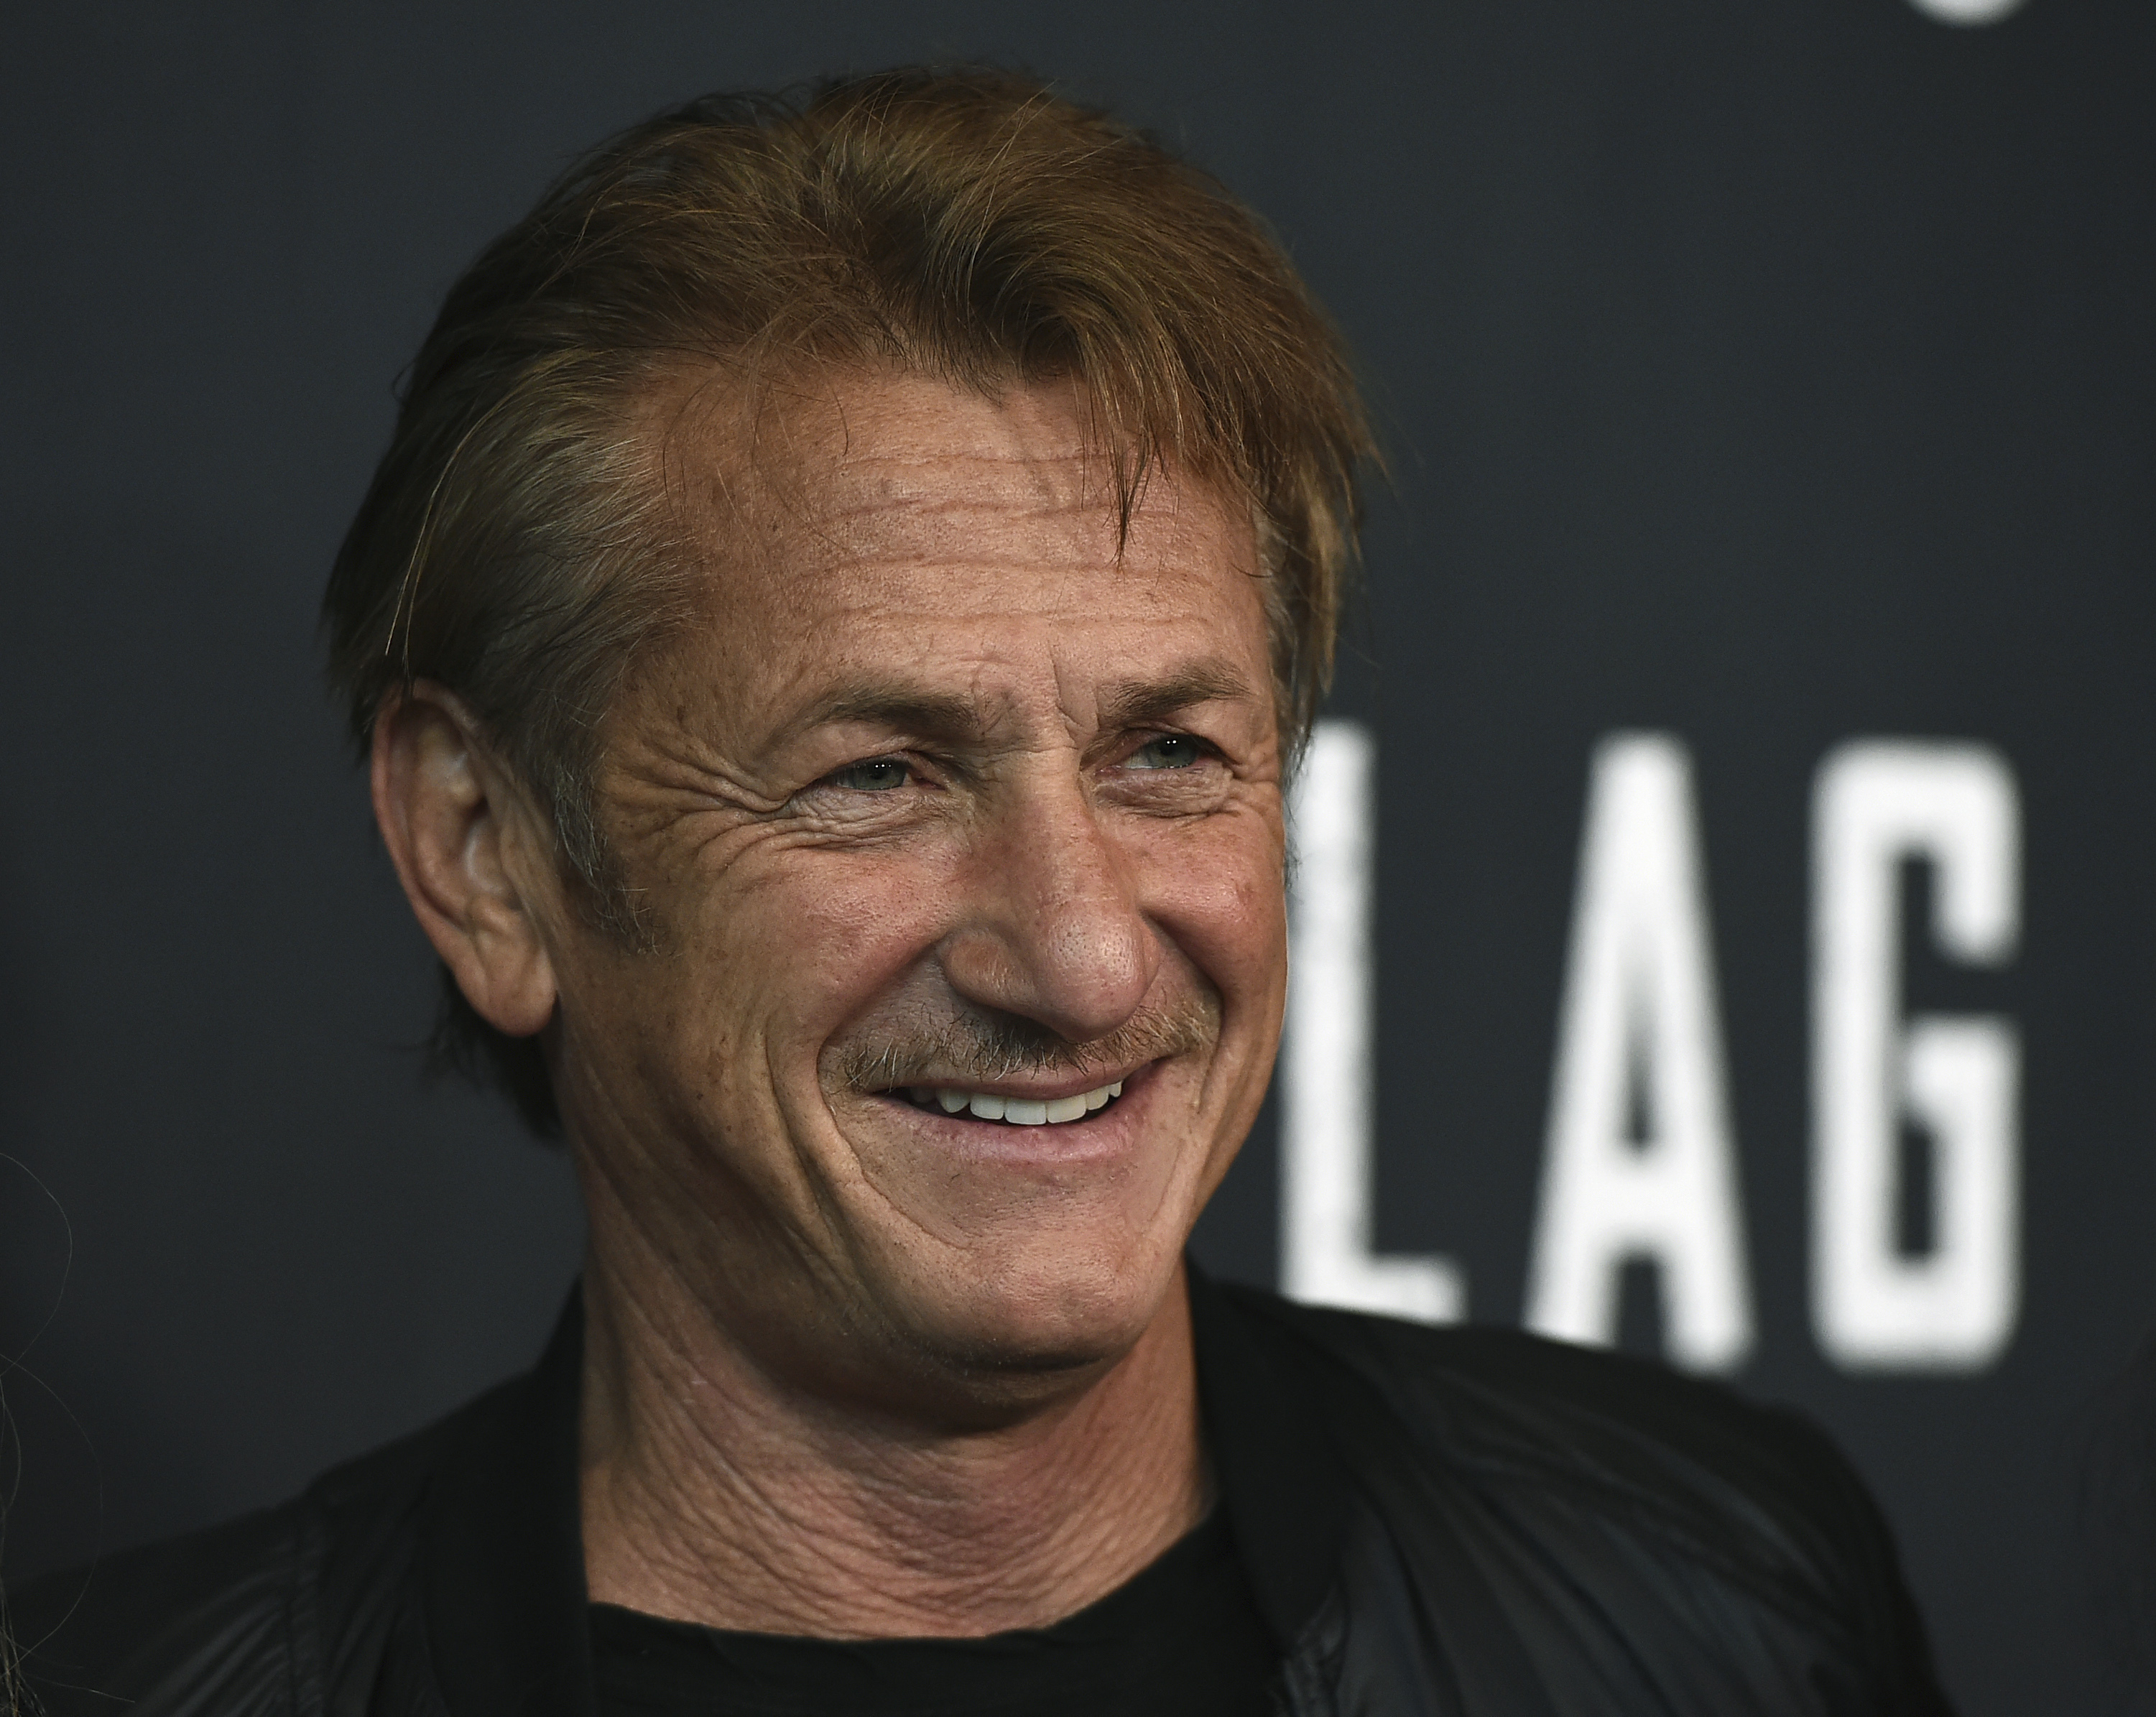 Sean Penn arrives at the Los Angeles premiere of "Flag Day" in Los Angeles on Aug. 11, 2021. (Jordan Strauss/Invision/AP, File)